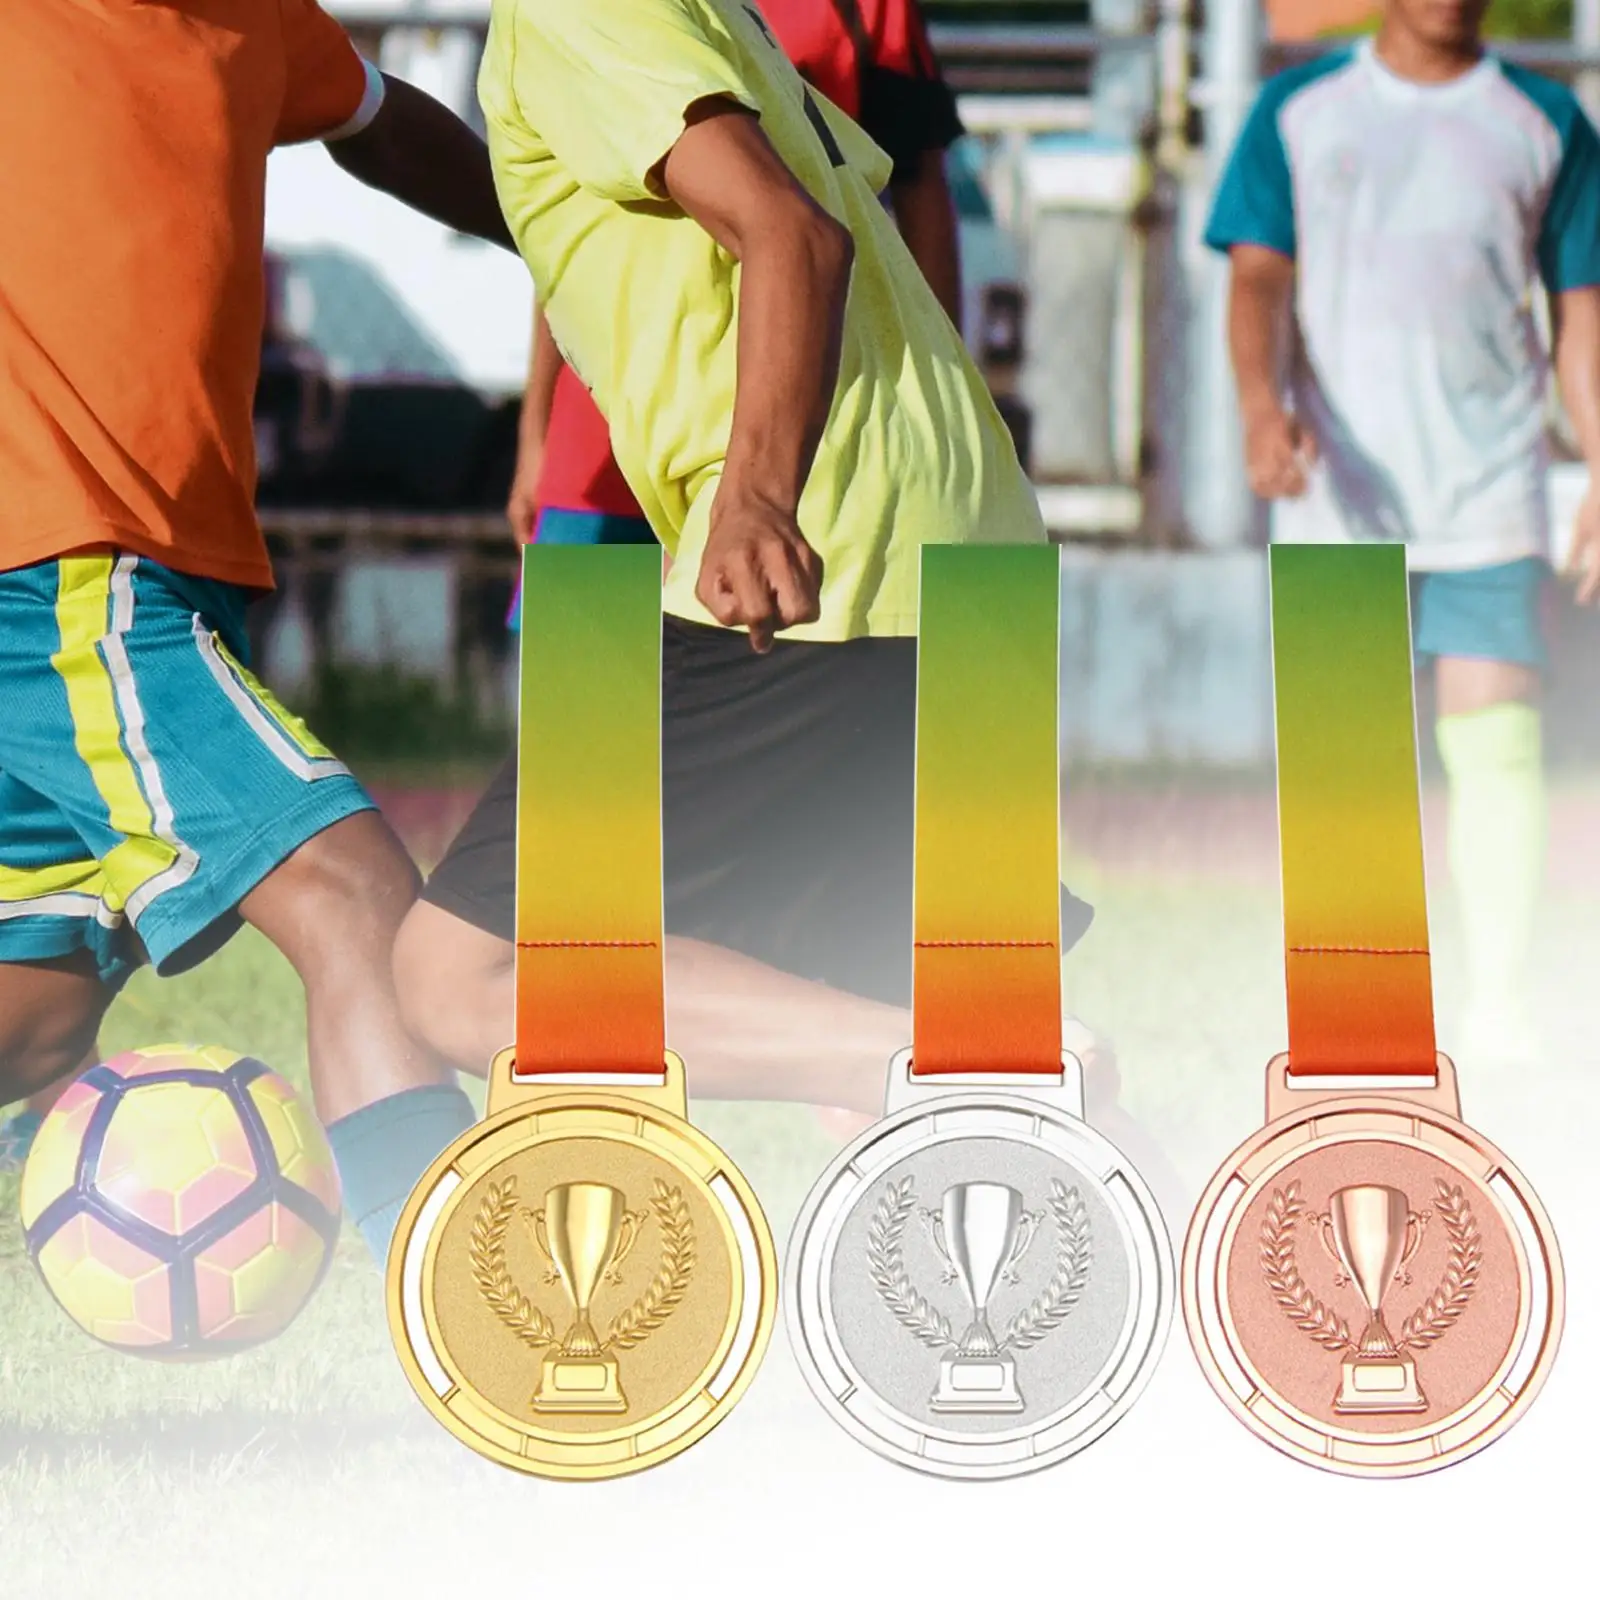 Round Winner Award Medals Soccer Football Medals for Sports Tournaments